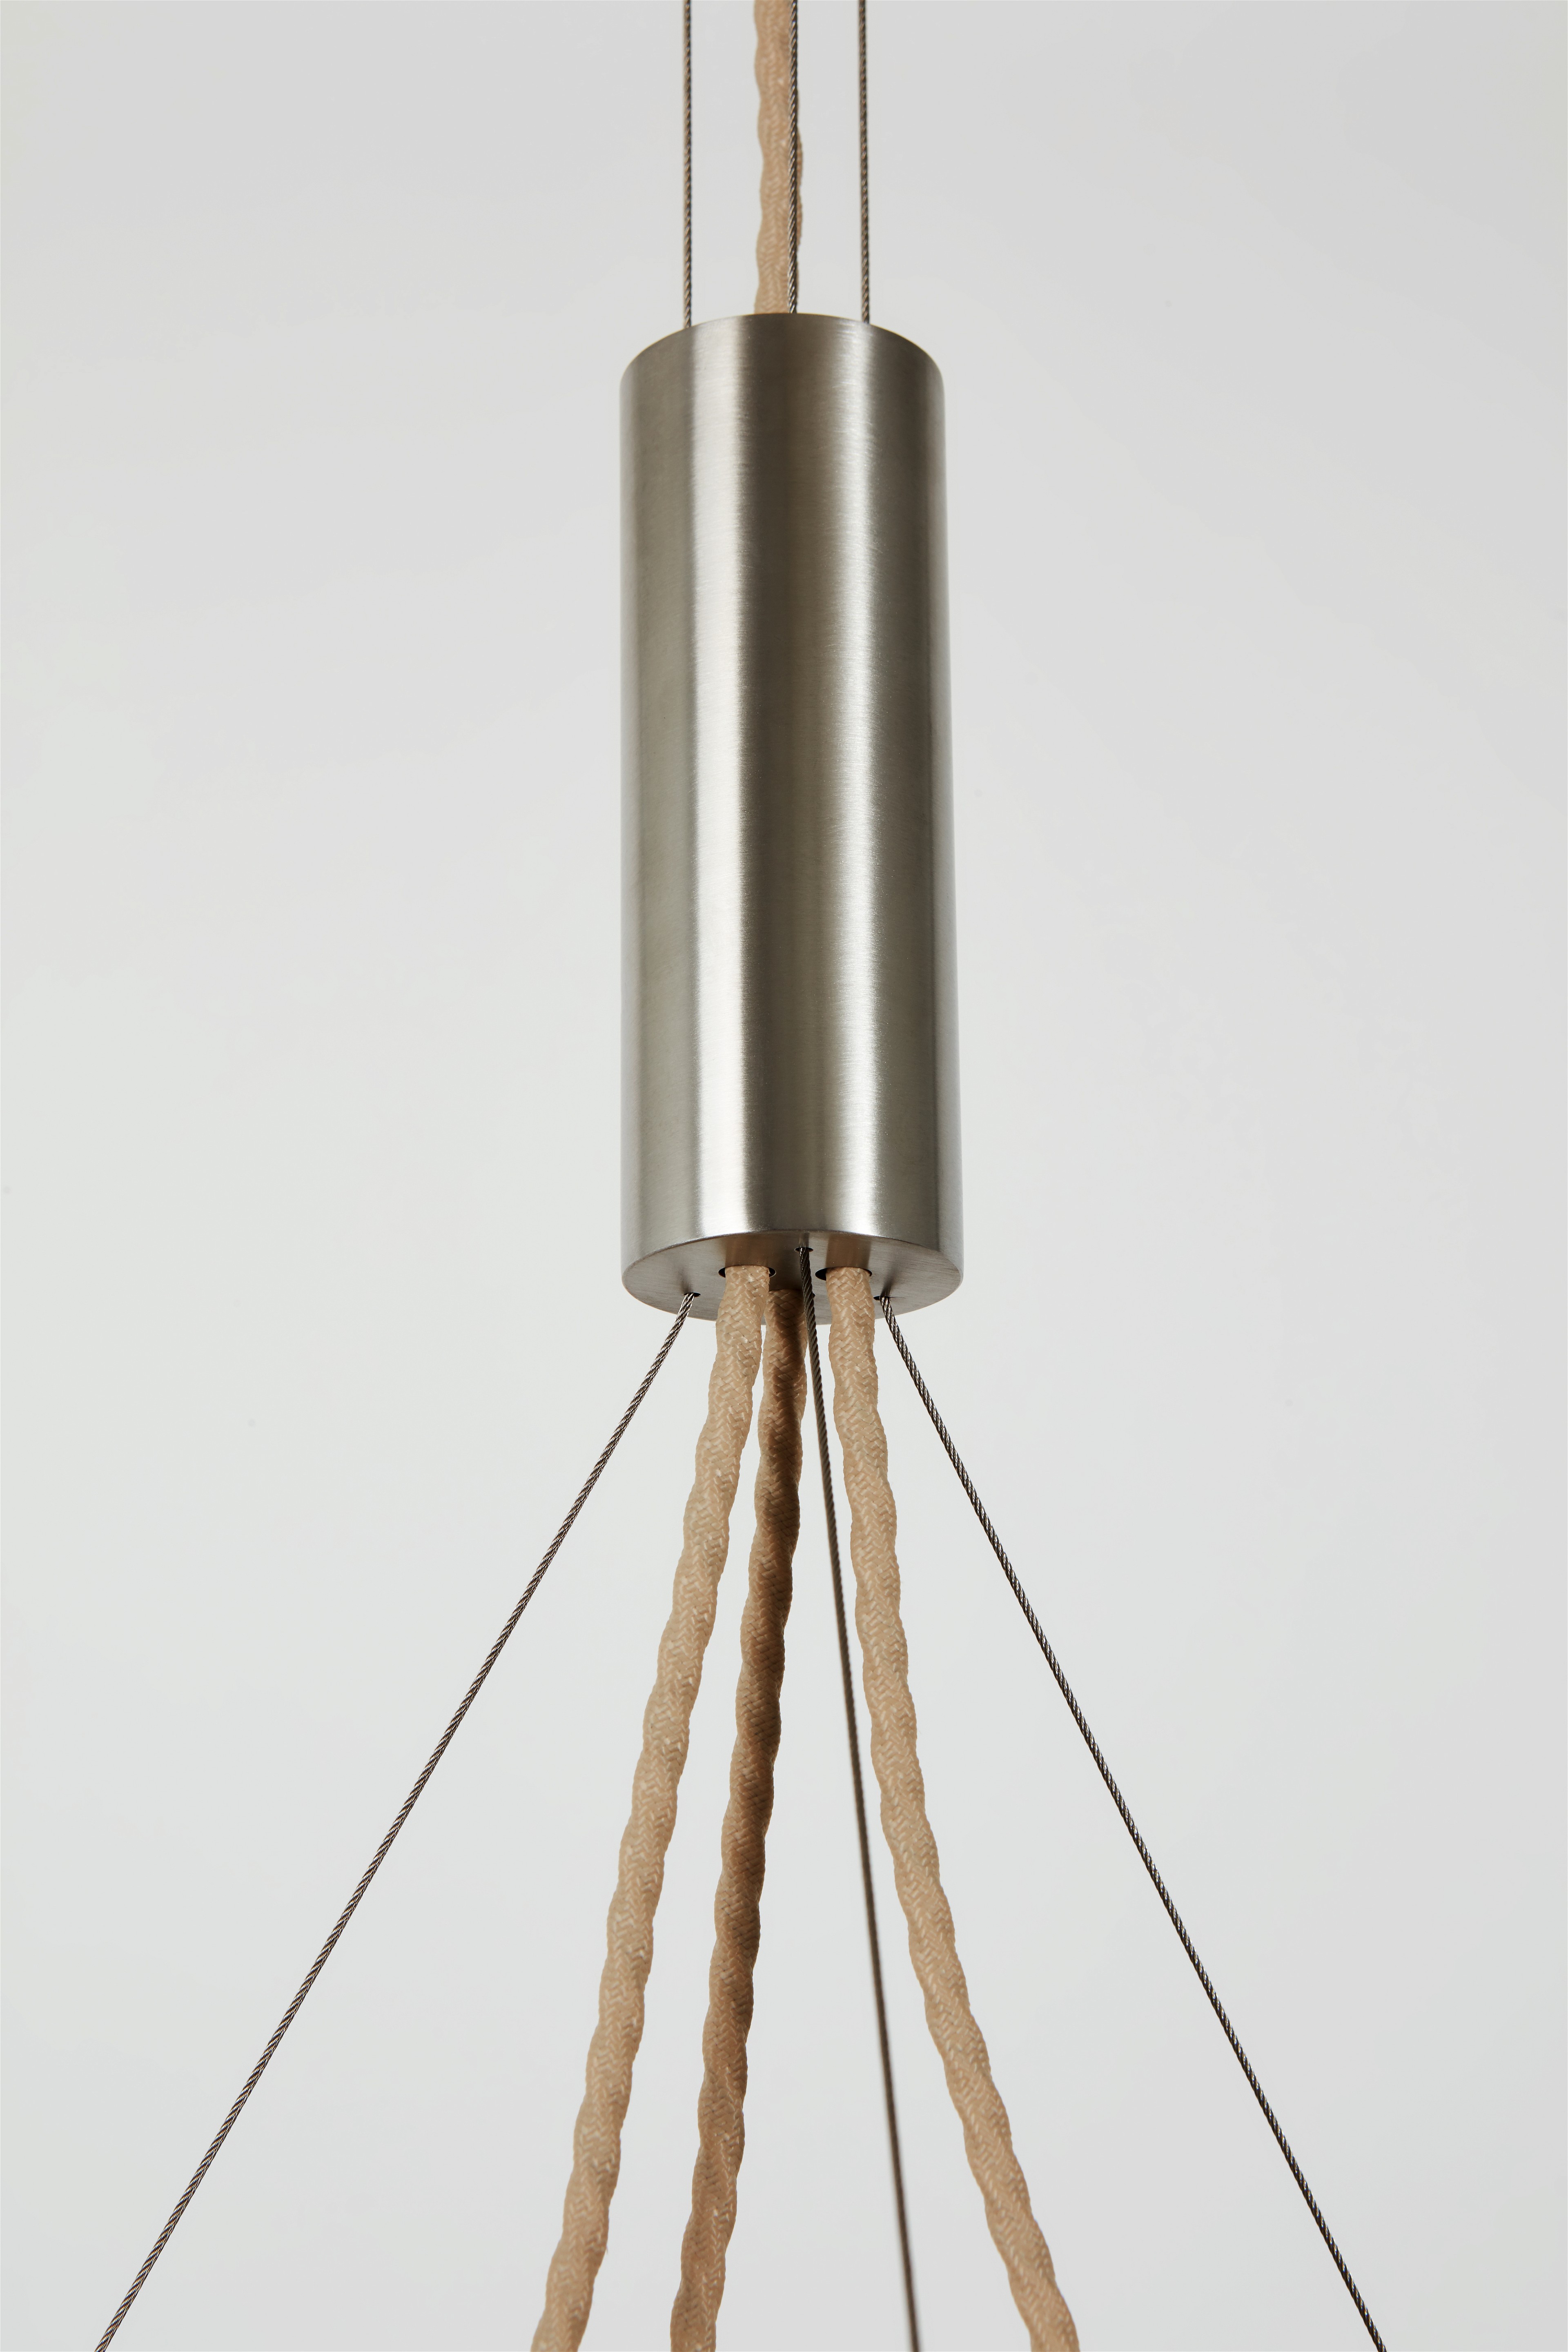 a metal light hanging from a ceiling fixture